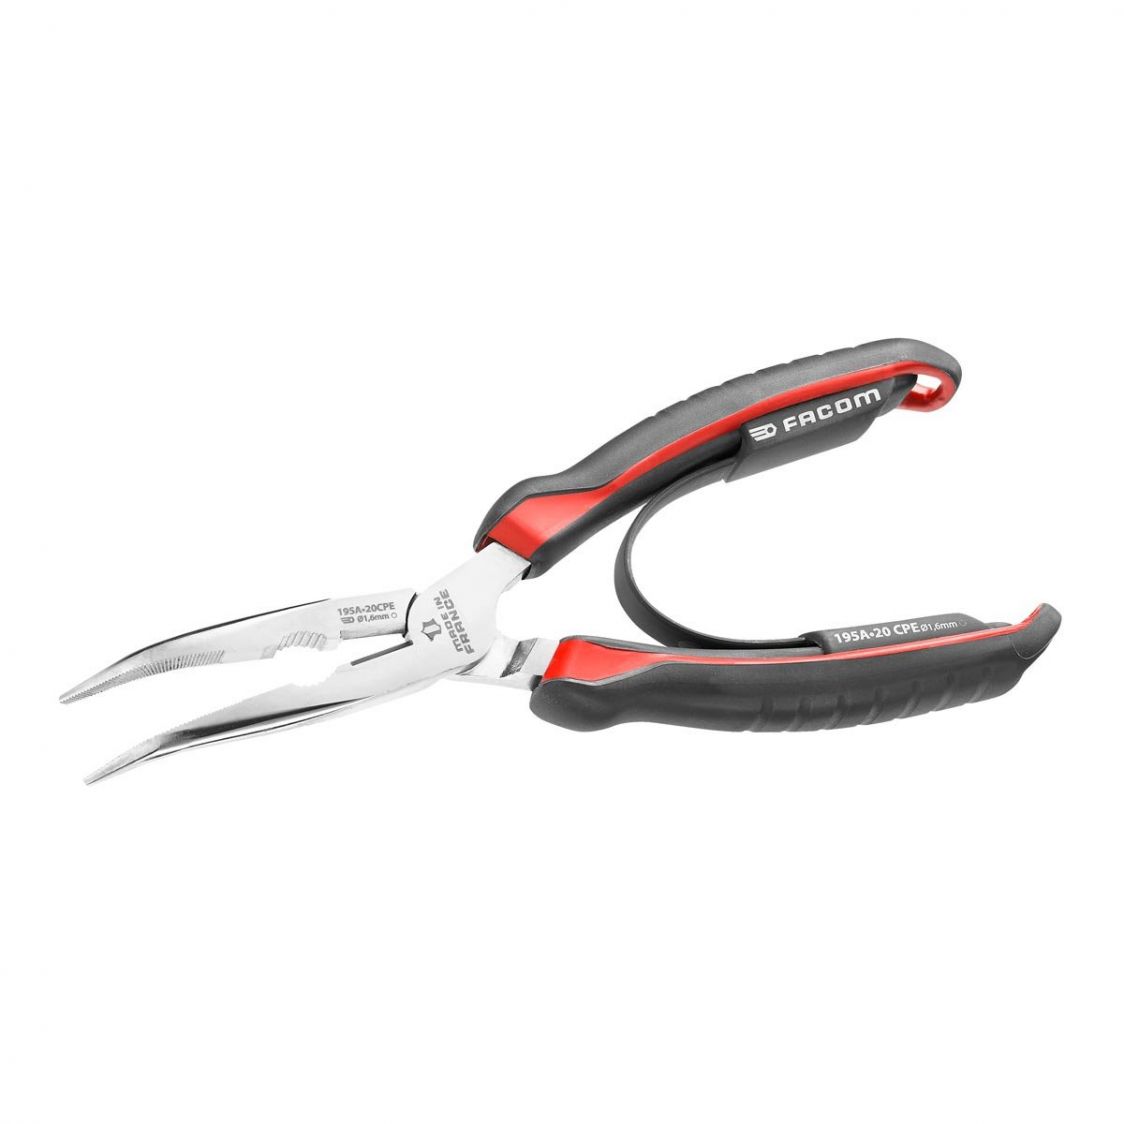 FACOM 195A.20CPE - 200mm Angled Long Half-Round Combination Comfort Grip Pliers